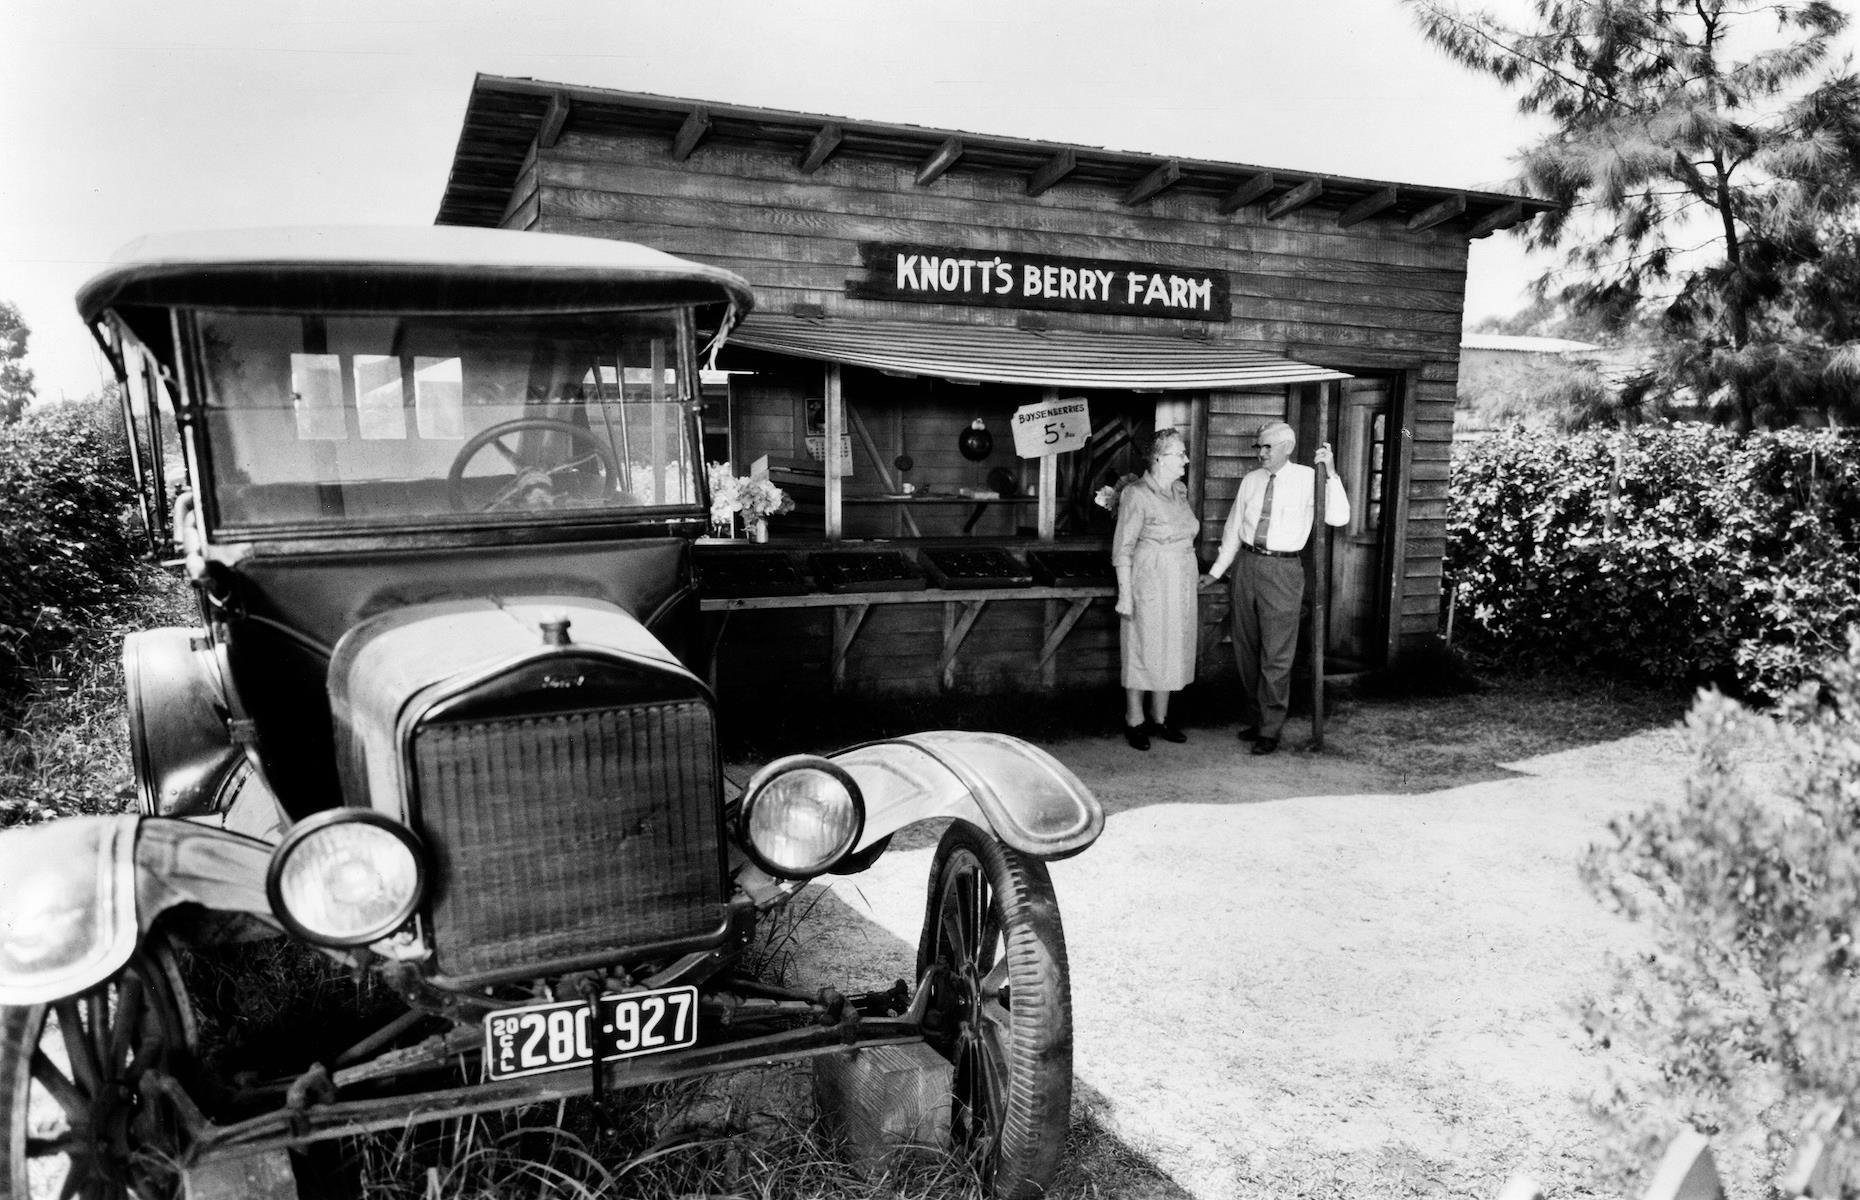 It’s hard to imagine this bustling theme park as a humble fruit stand, but that’s where it all began. The Knott family arrived in Buena Park in 1920 to farm at Knott’s Berry Place, as it was known. They opened a berry stand followed by a chicken restaurant, which people flocked to from far and wide. In 1940, Walter Knott built a ghost town to entertain the hungry hordes. It was the first themed area of what became known as Knott’s Berry Farm in 1947.